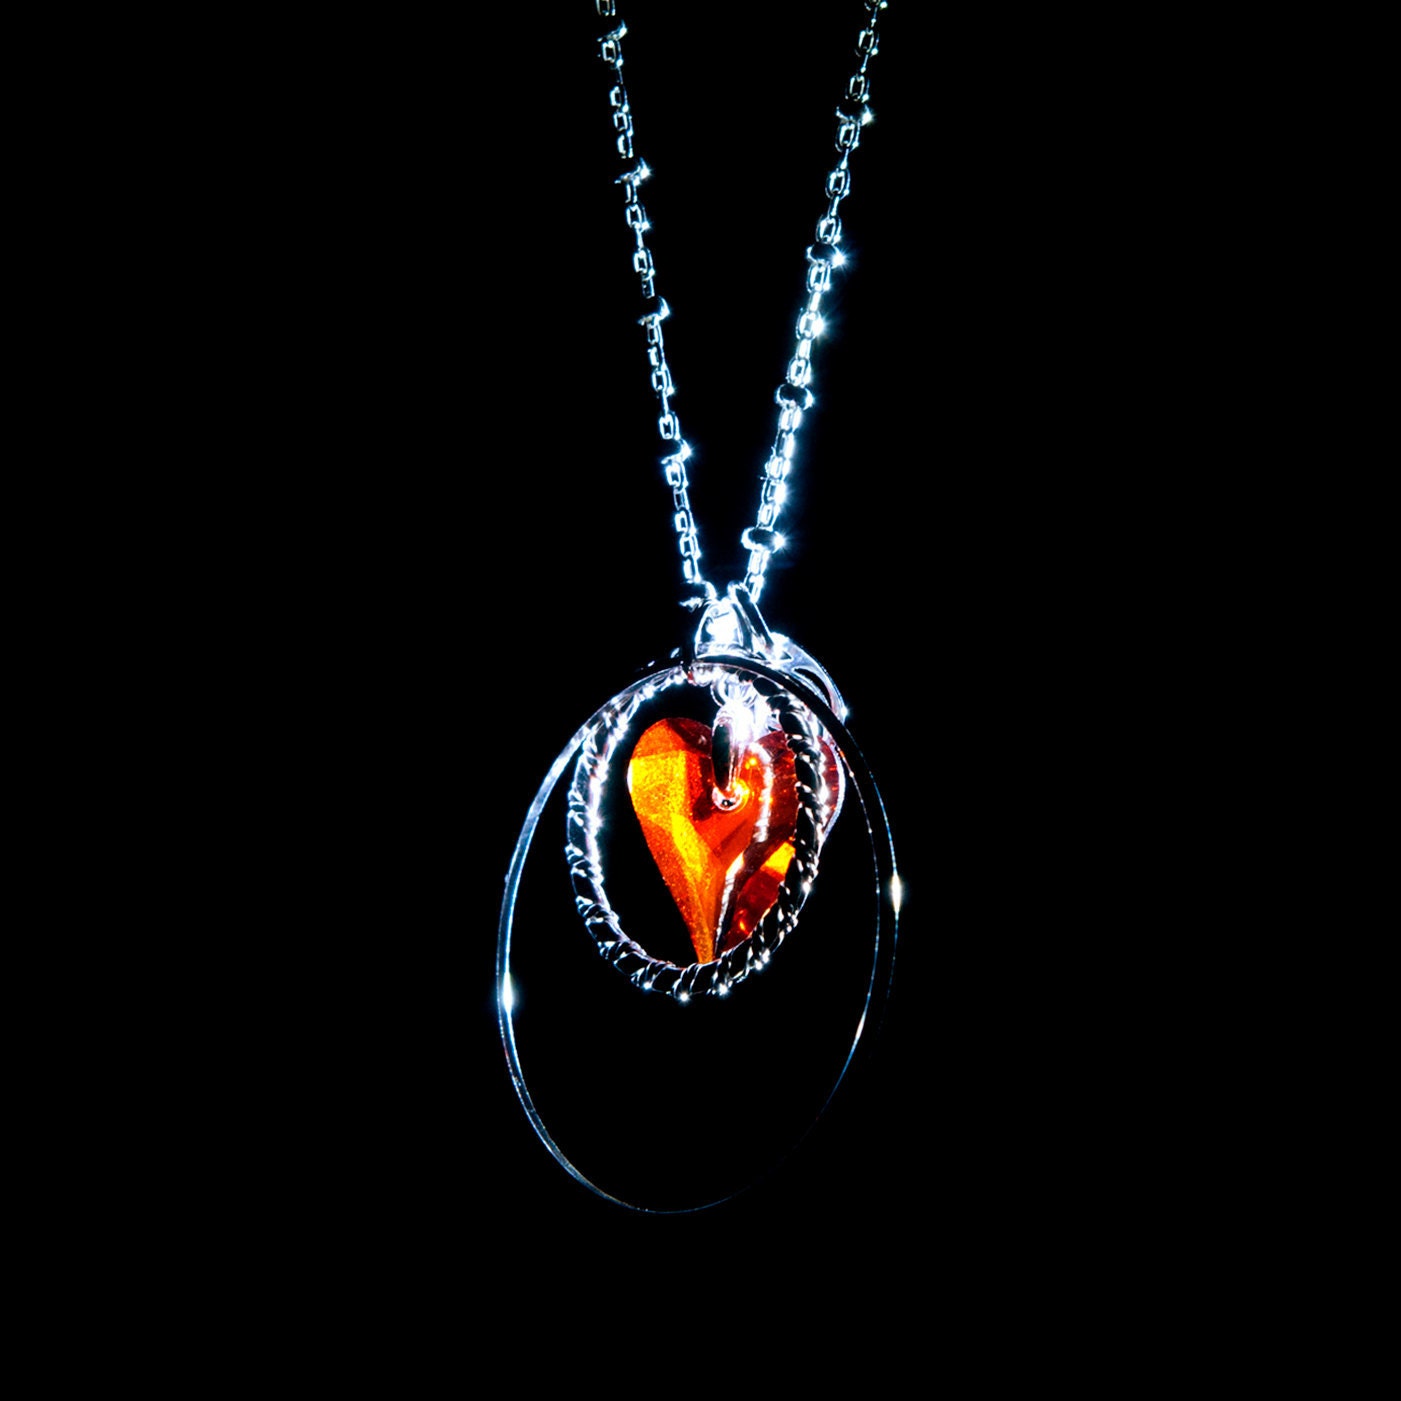 Valentine's Sale - crystal red wild heart necklace - Swarovski 6240 WILD HEART 17mm pendant with 2 sterling silver ring